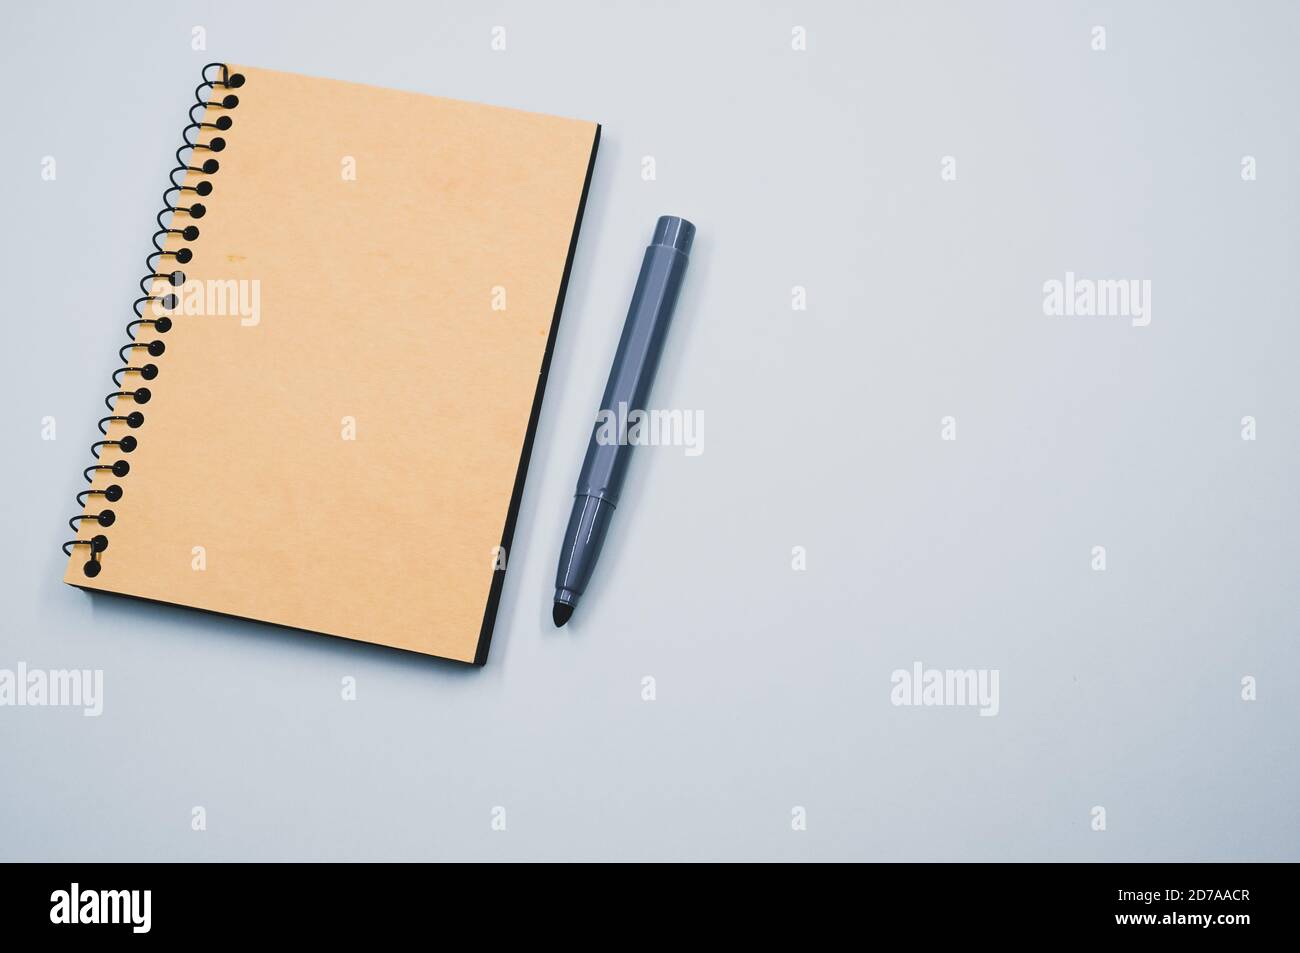 High angle shot of a notebook and a marker on a blue surface Stock Photo